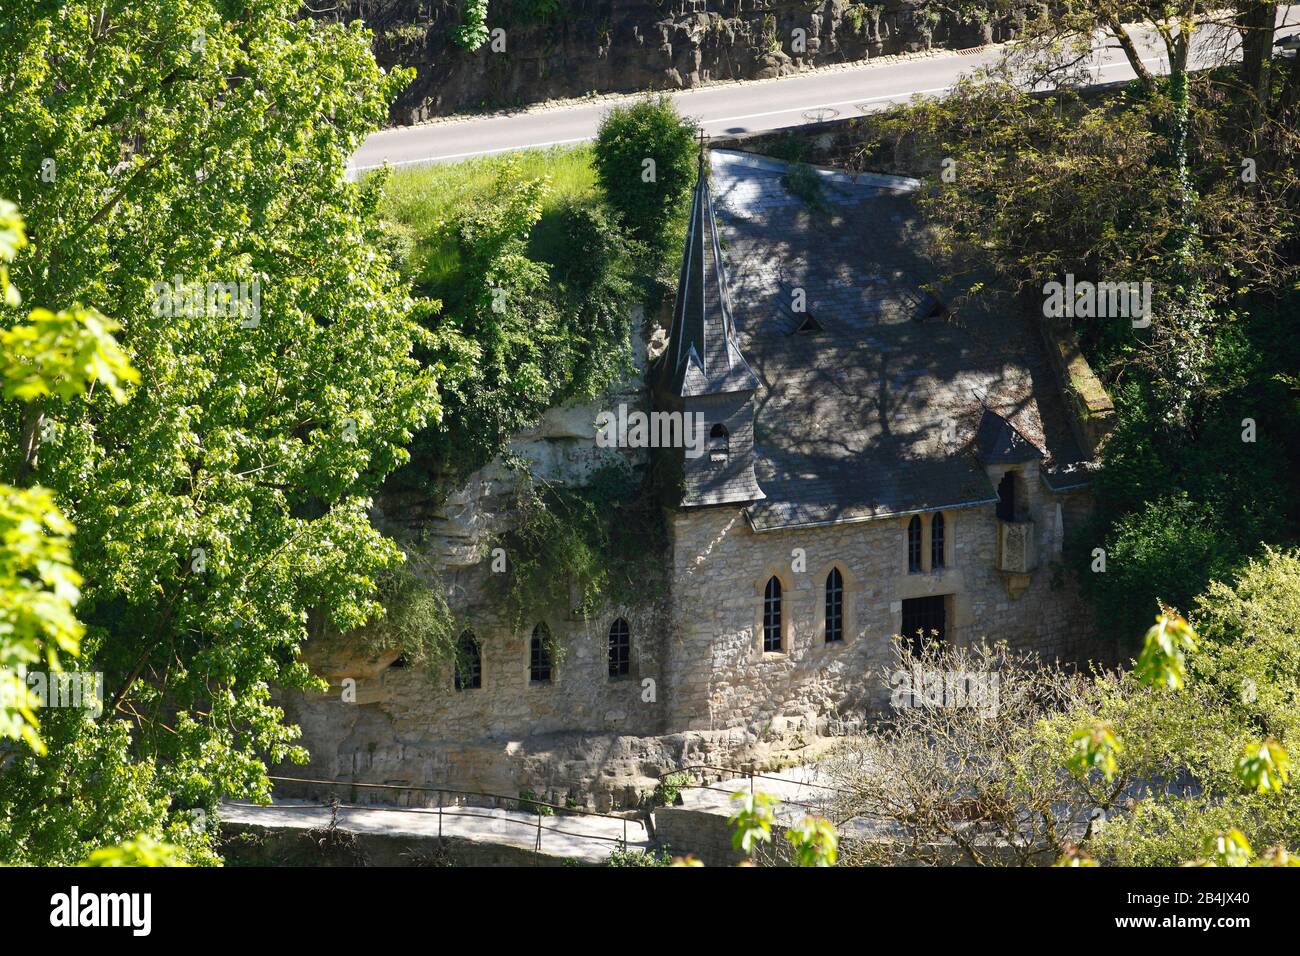 Quirinus chapel in the Petrusse valley, Luxembourg, Europe Stock Photo